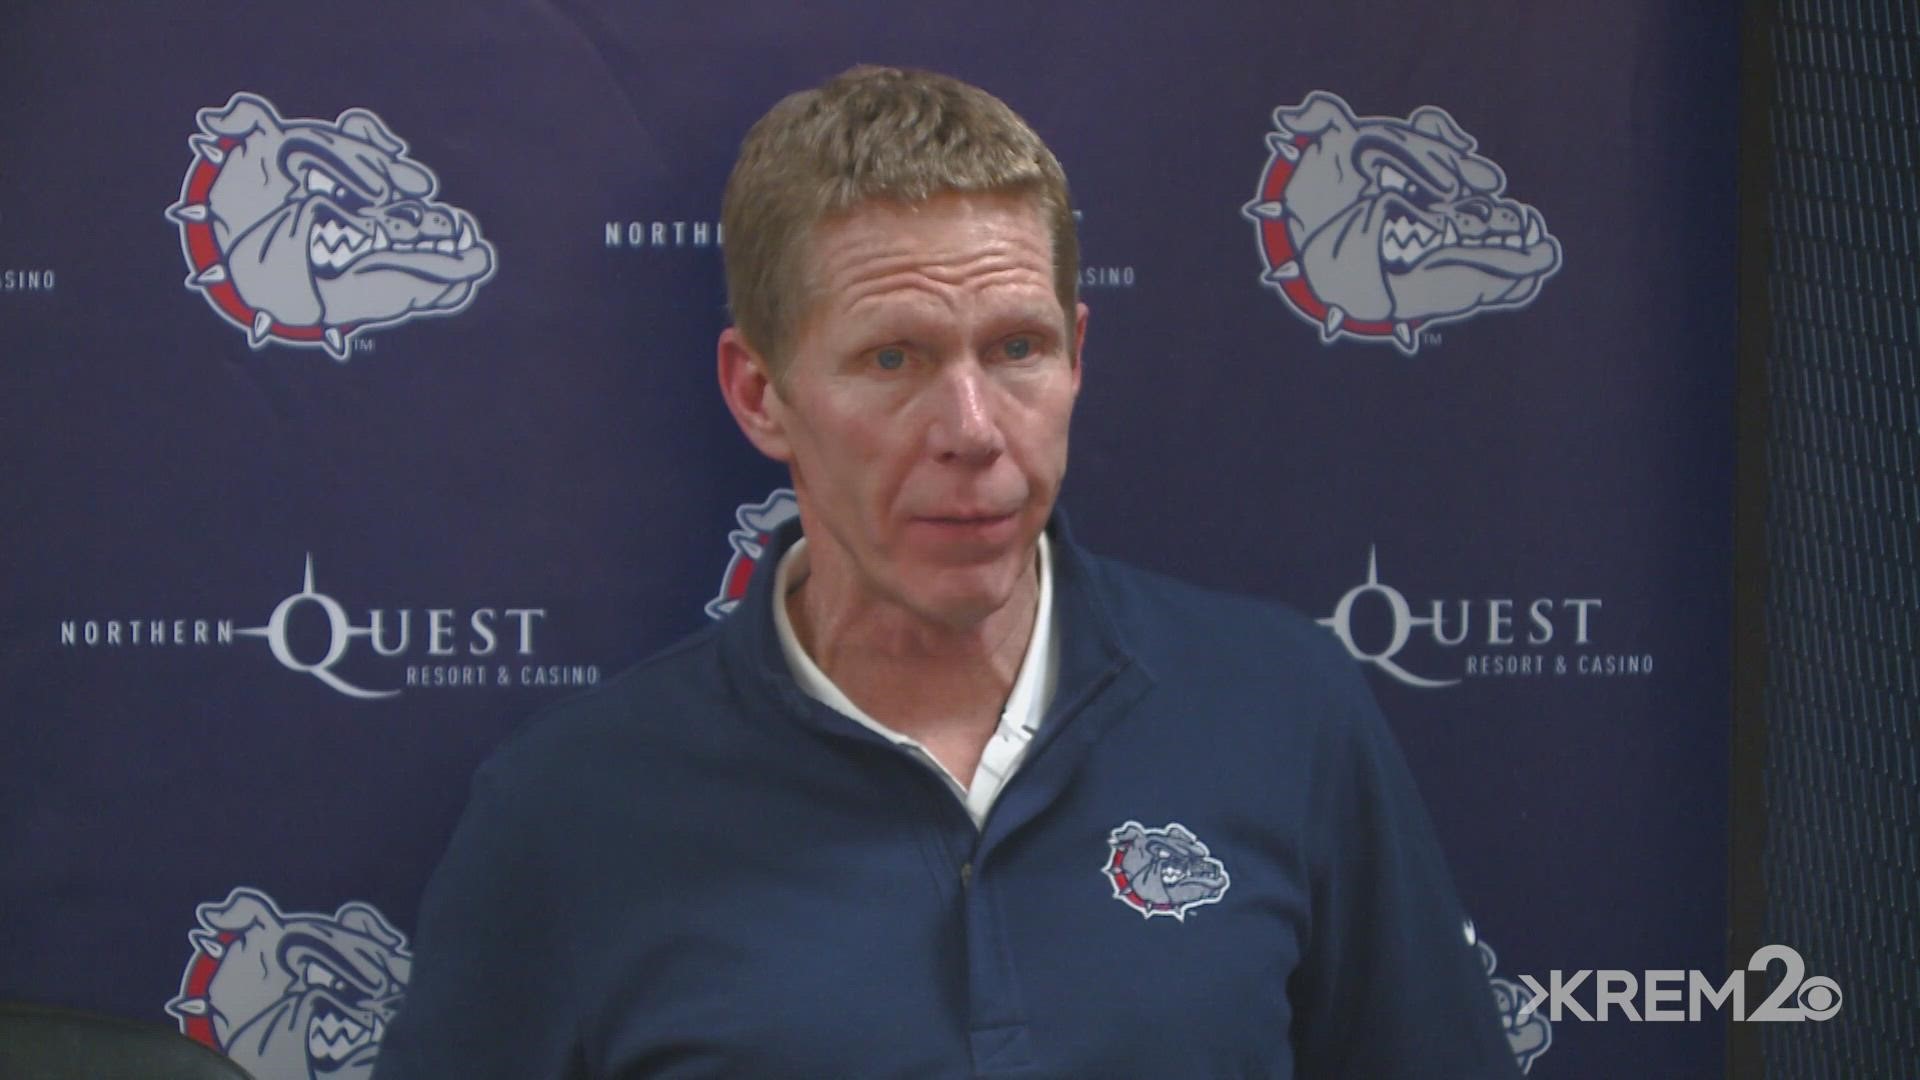 Gonzaga Coach Mark Few talks about the Bulldogs win over Saint Mary's on Feb. 12, 2022. Coach few also looks ahead to the team's next game against Pepperdine.